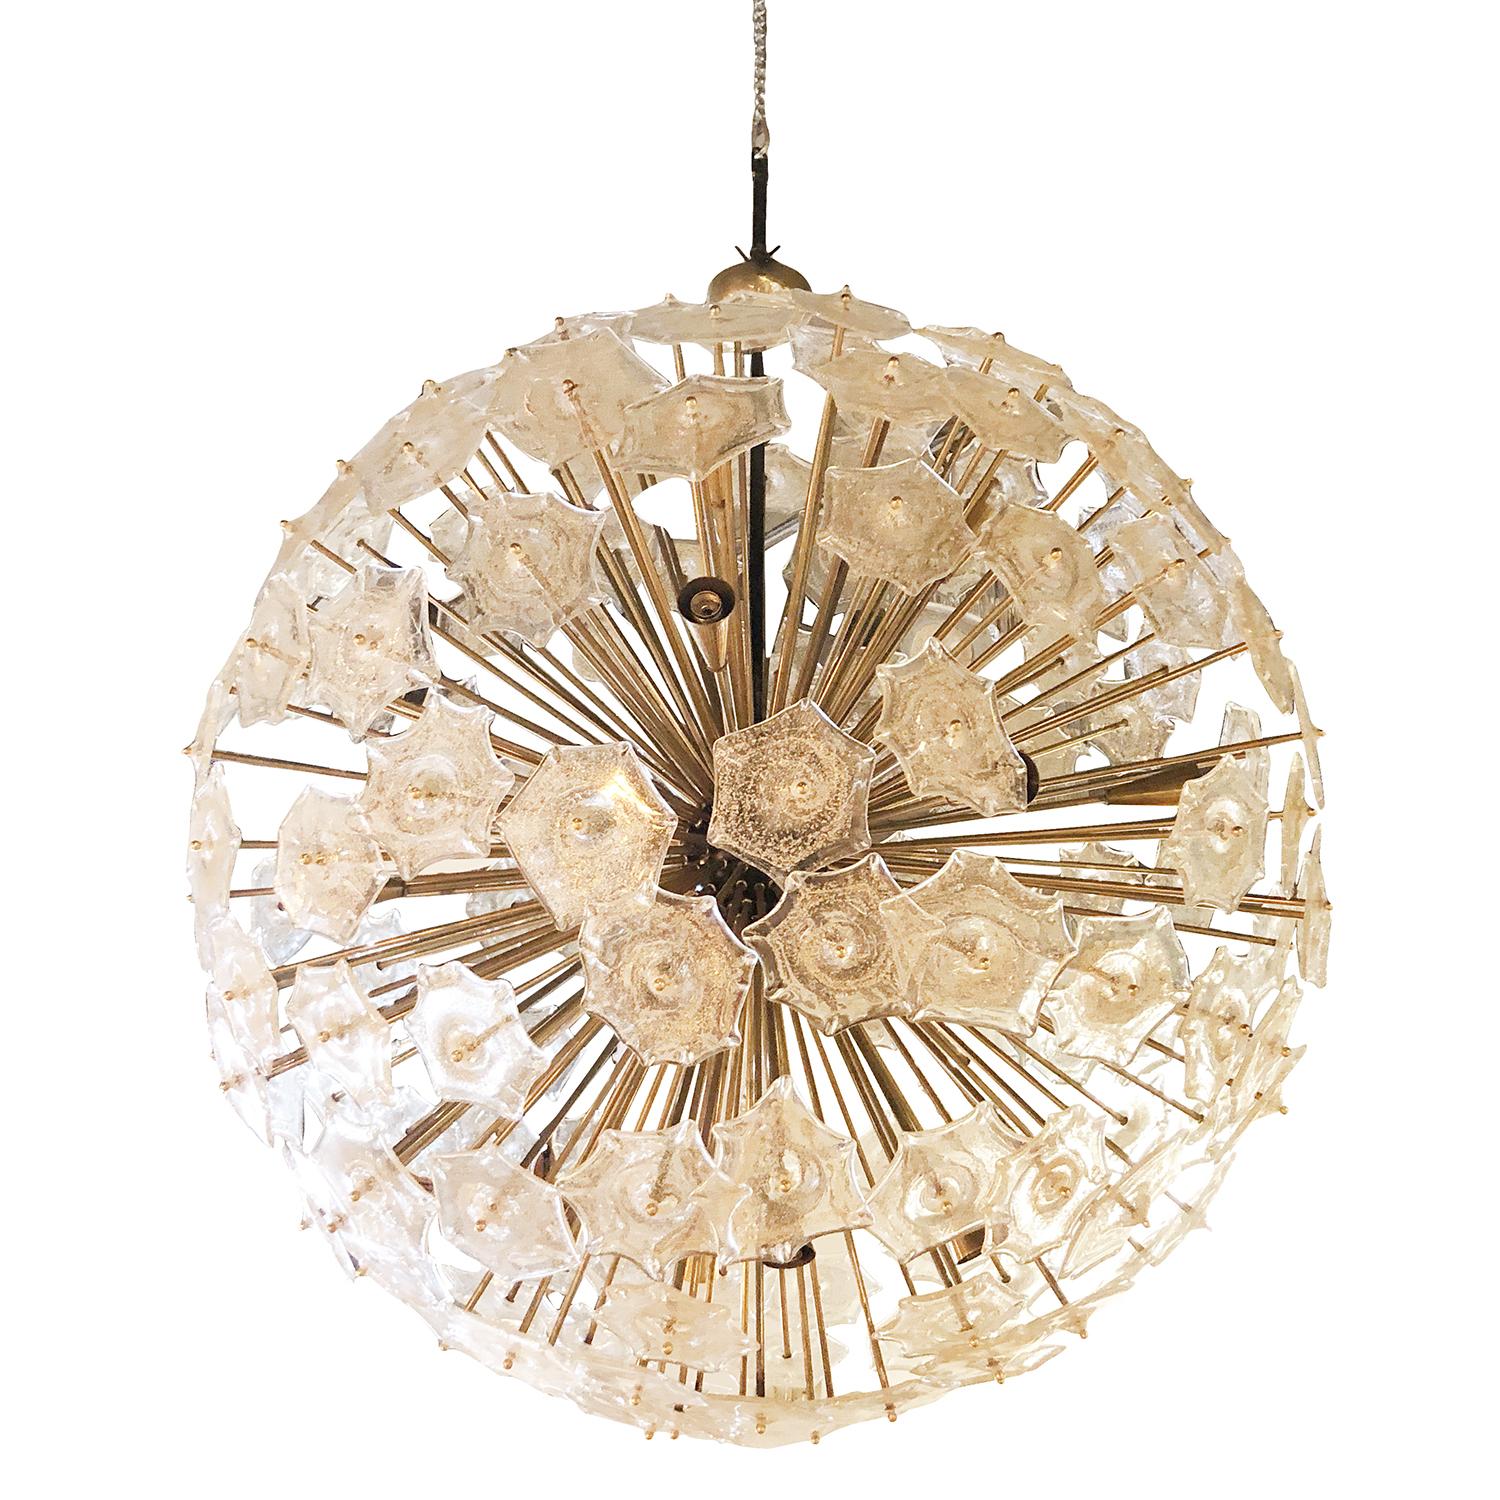 A very large Mid-Century Modern Italian chandelier of round shape, designed with octagonal heavy Murano glass elements, with brass finial finish and structure. The vintage ceiling mount pendant has twelve light sockets, stunning design element for